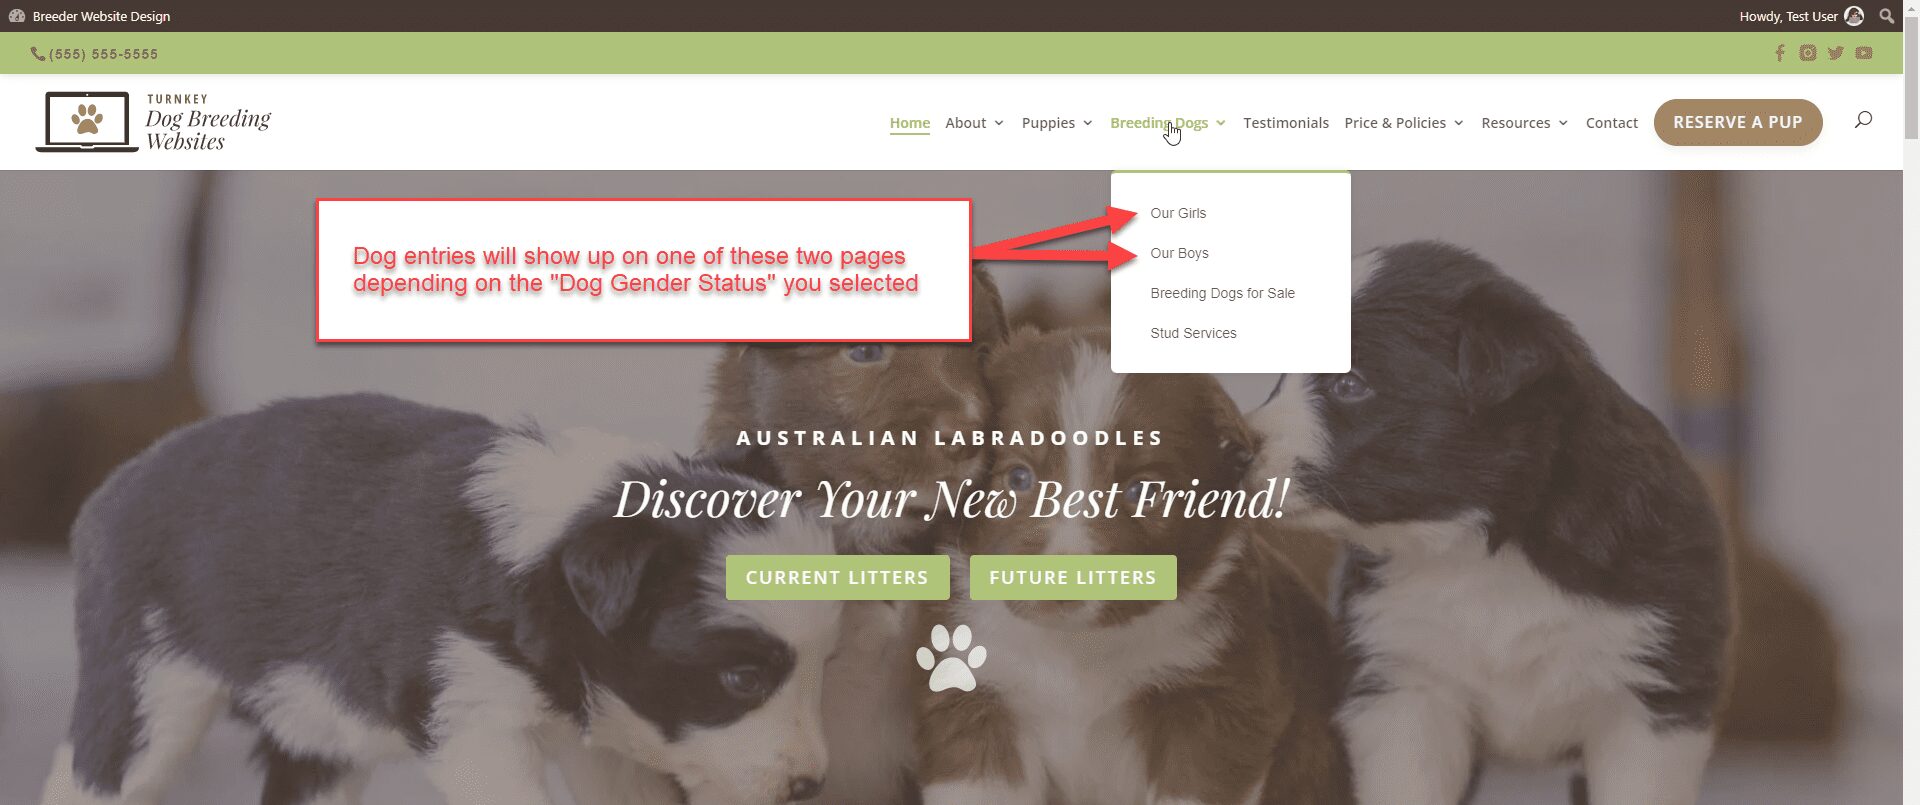 Dogs - Where Dogs Show on The Front of the Website - Screenshot